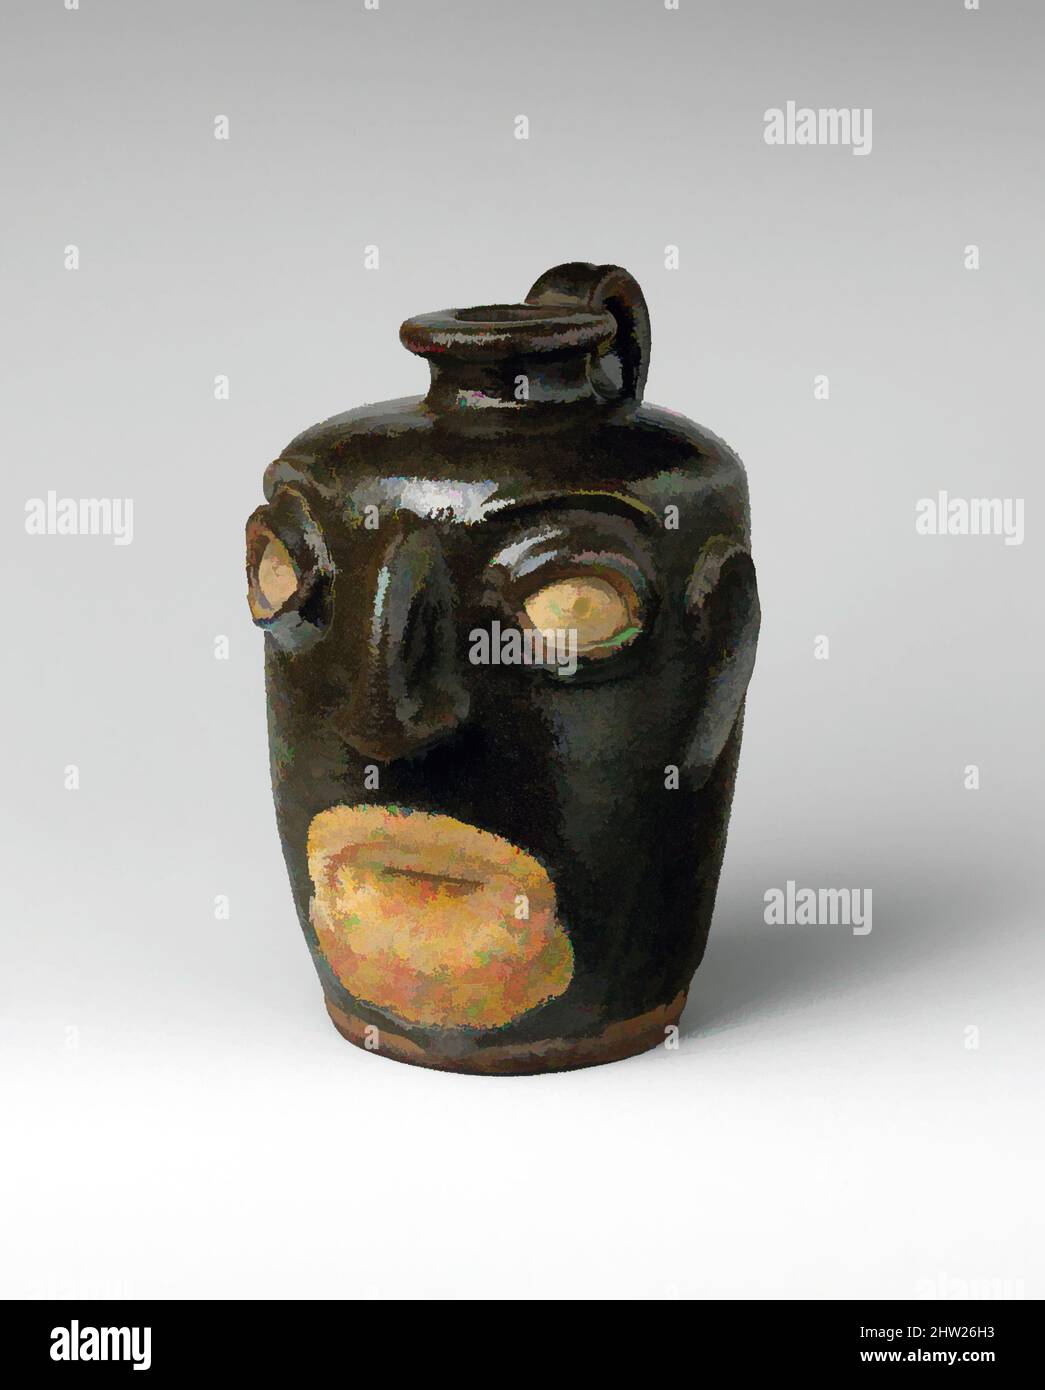 Art inspired by Face Jug, ca. 1860–70, Made in Edgefield District, South Carolina, United States, American, Alkaline-glazed stoneware, 7 x 5 x 5 1/2 in. (17.8 x 12.7 x 14 cm), Ceramics, John Lewis Miles Pottery (1868–75), Face jugs were made by African American slaves and freedmen, Classic works modernized by Artotop with a splash of modernity. Shapes, color and value, eye-catching visual impact on art. Emotions through freedom of artworks in a contemporary way. A timeless message pursuing a wildly creative new direction. Artists turning to the digital medium and creating the Artotop NFT Stock Photo